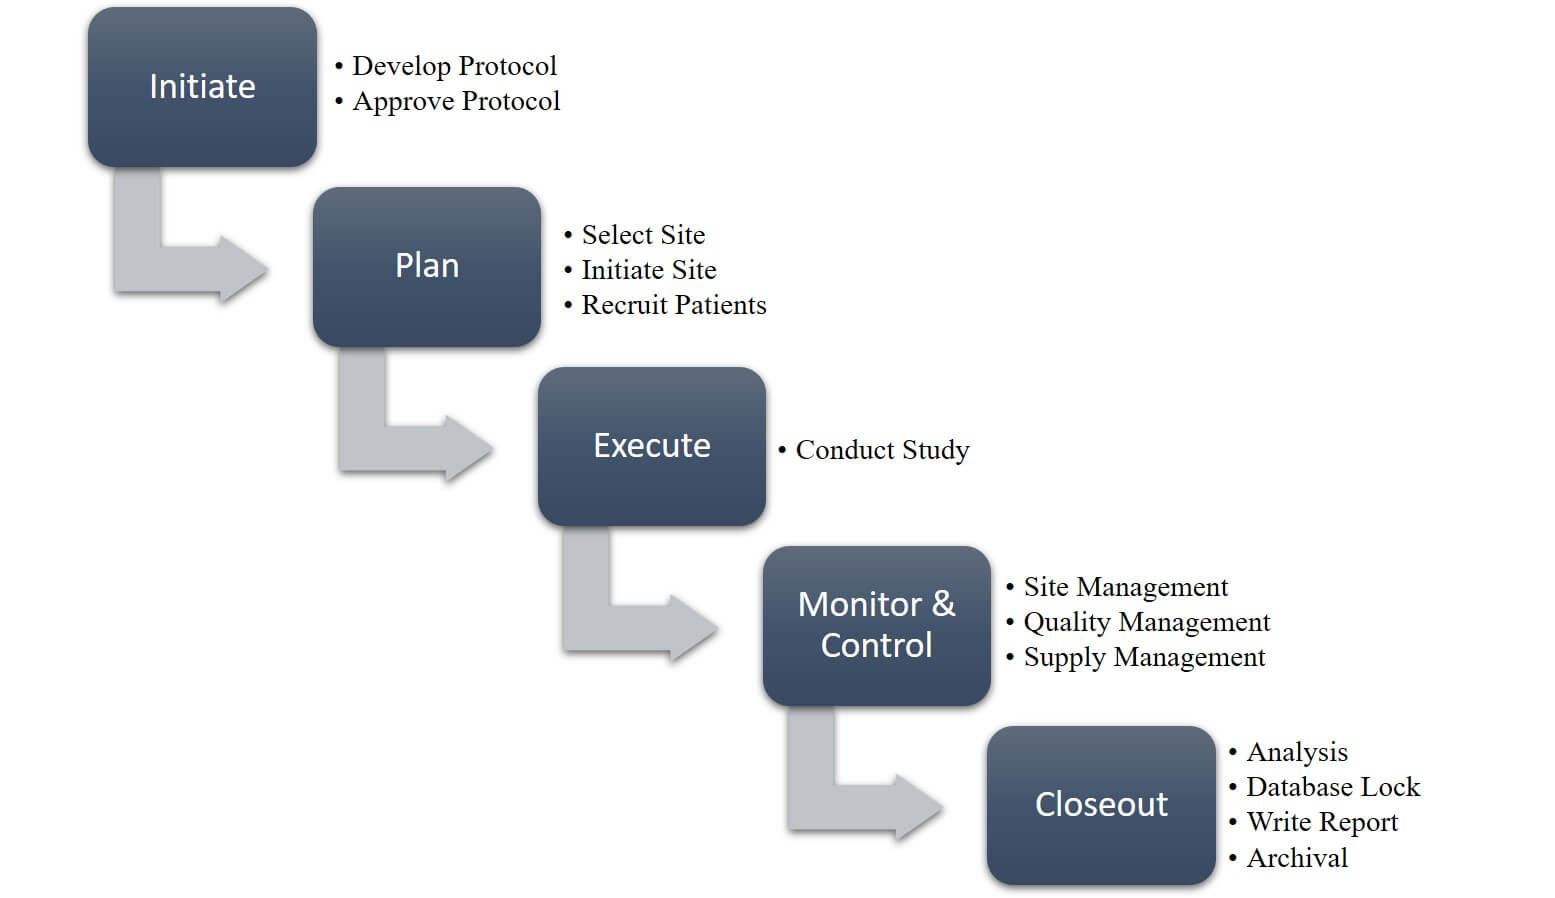 Clinical Trial Management Process